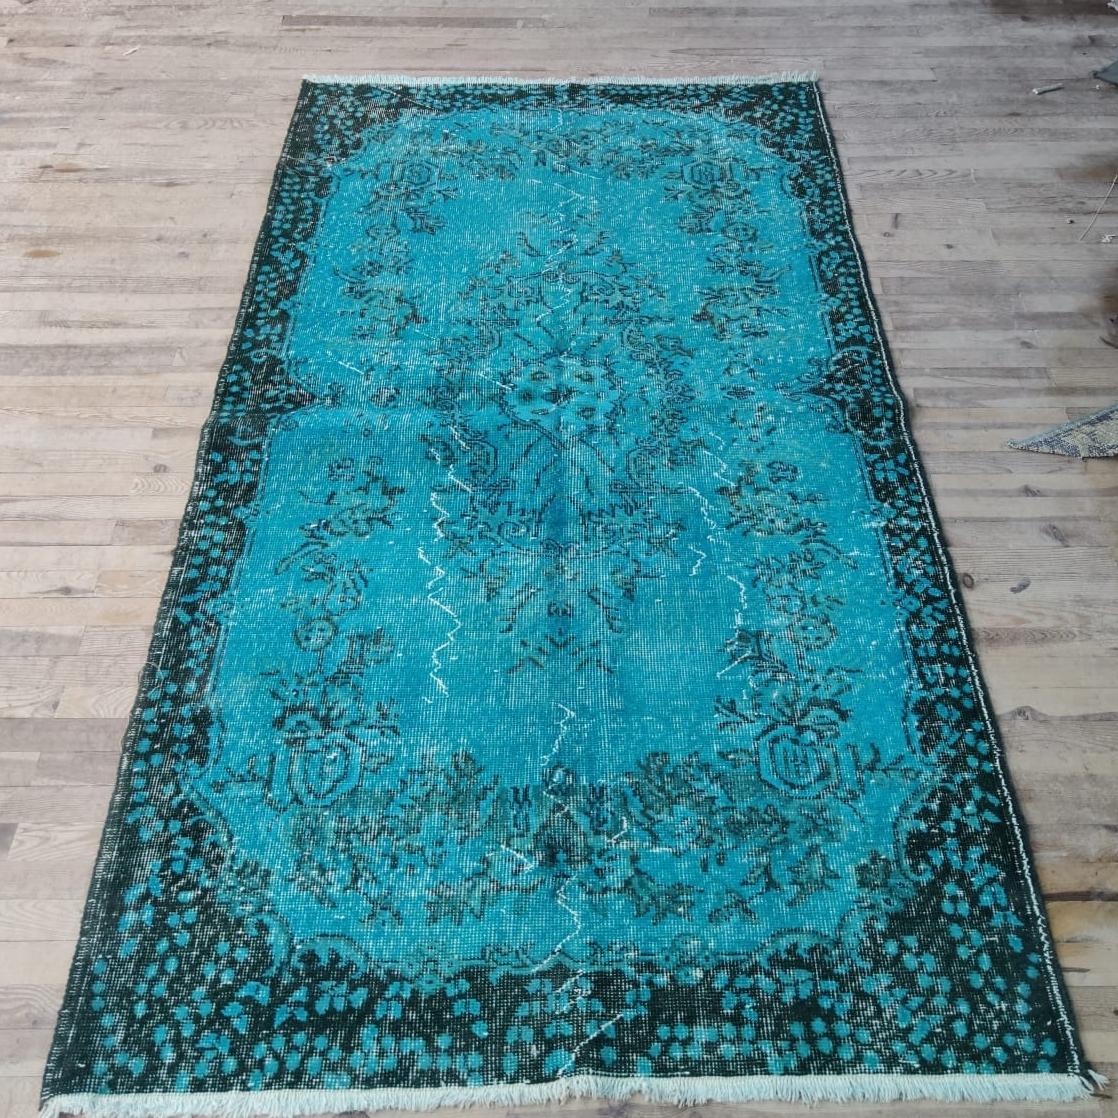 A vintage Turkish rug over-dyed in teal color for contemporary interiors.
The rug is finely hand-knotted, has low wool pile on cotton foundation. It is in very good condition, professionally washed, sturdy and suitable for areas with high foot